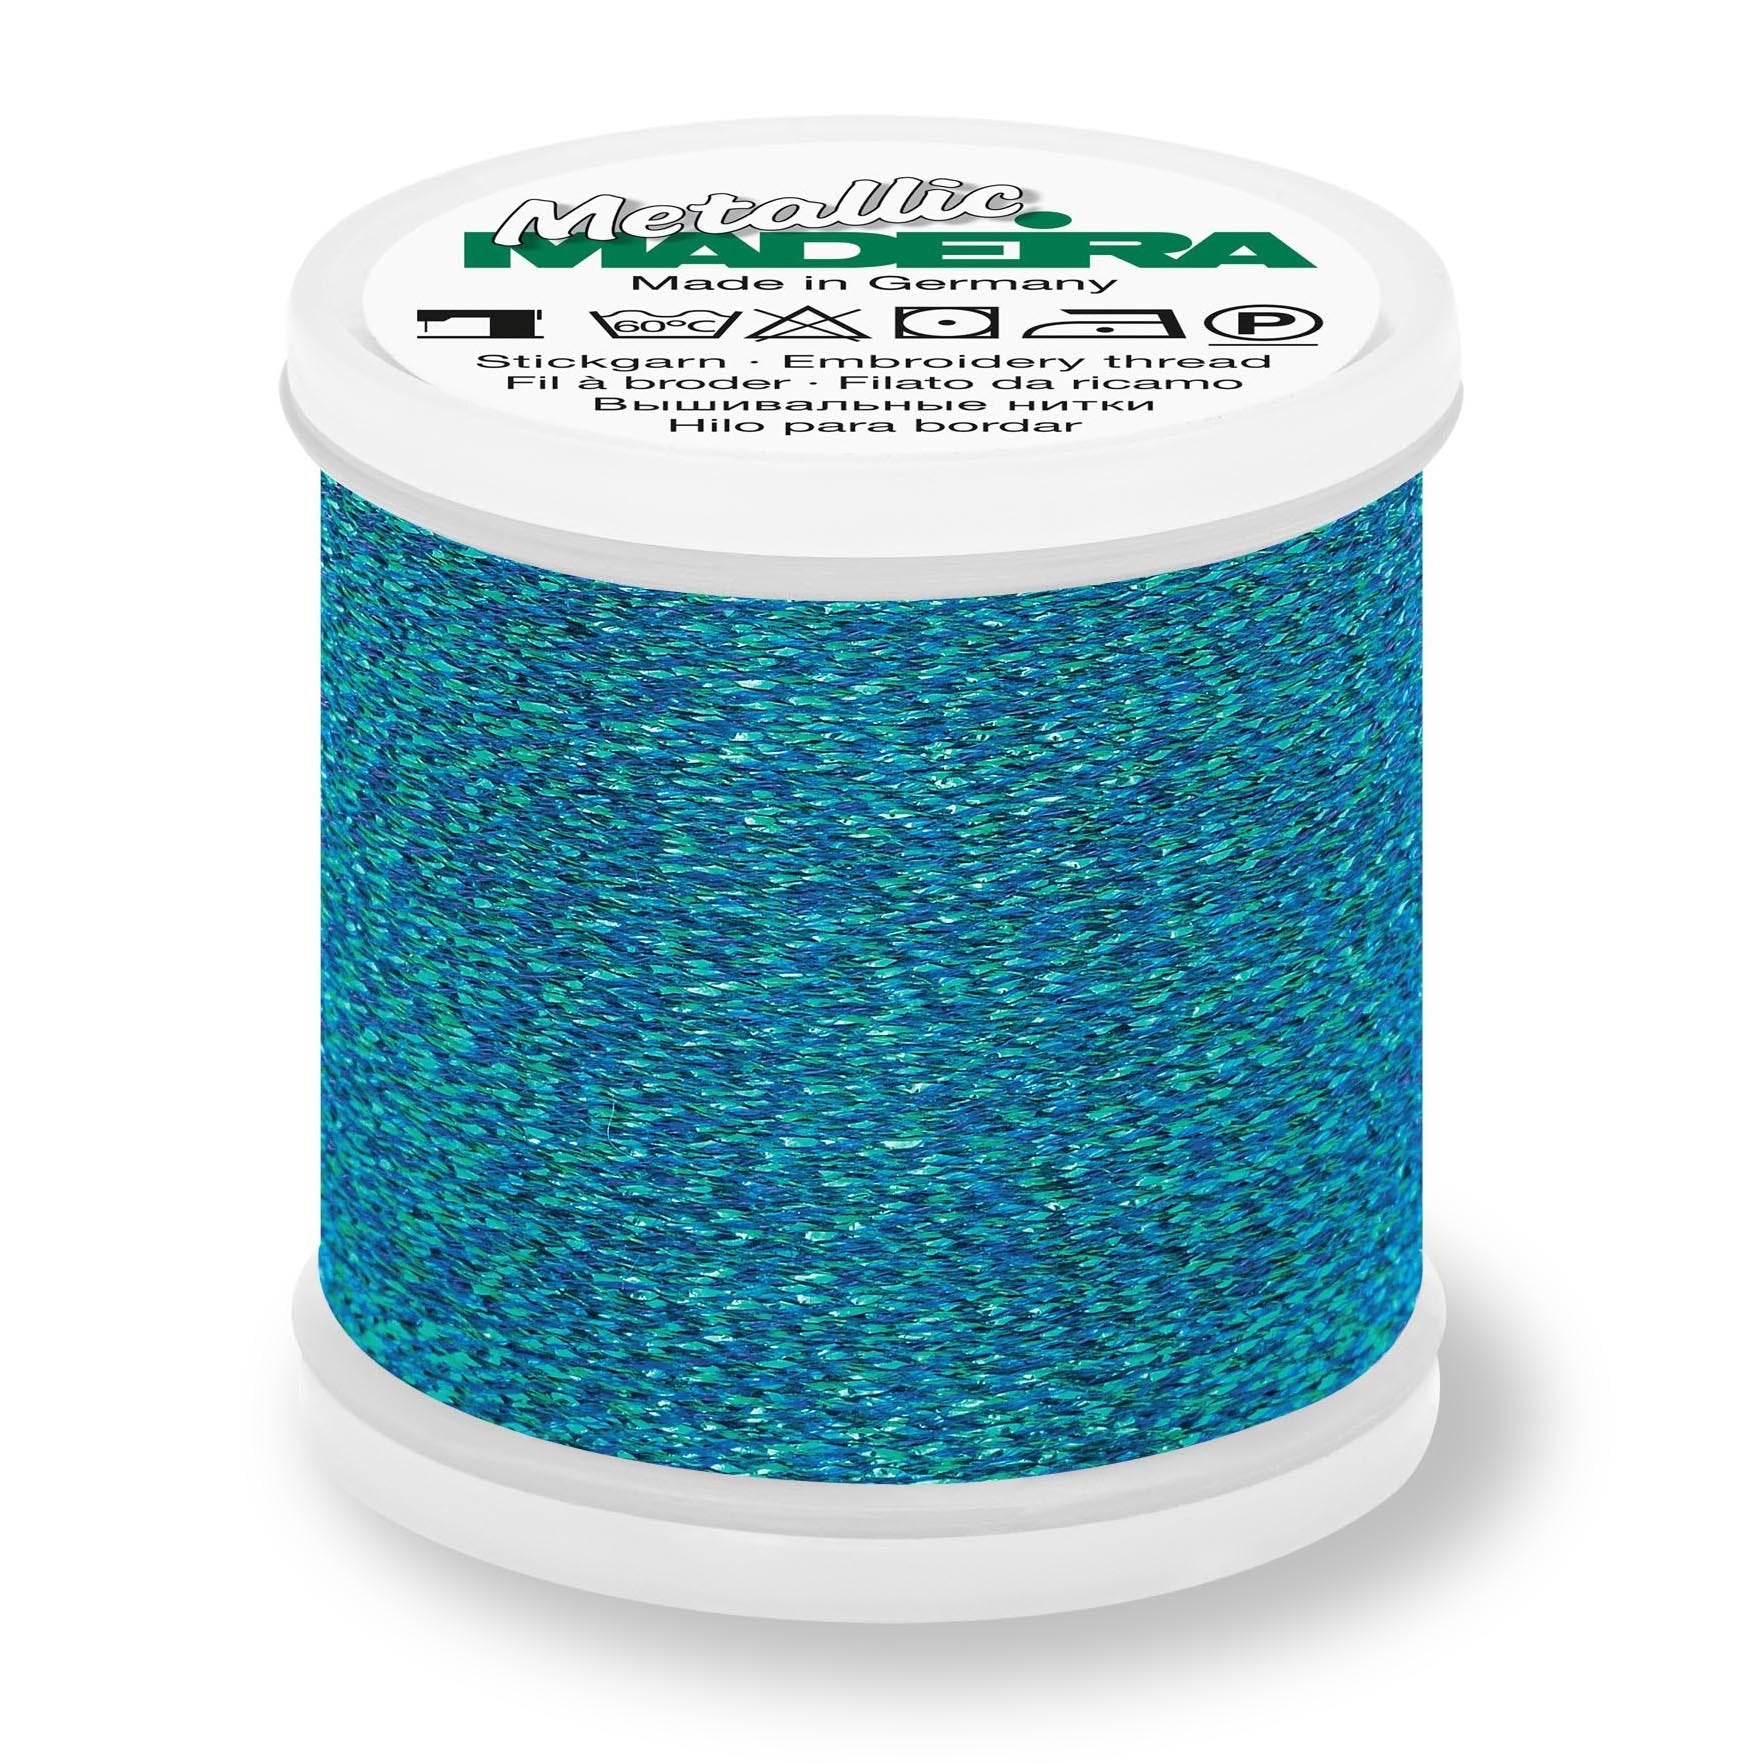 Madeira Textured Metallic Embroidery Thread, 200m Turquoise from Jaycotts Sewing Supplies